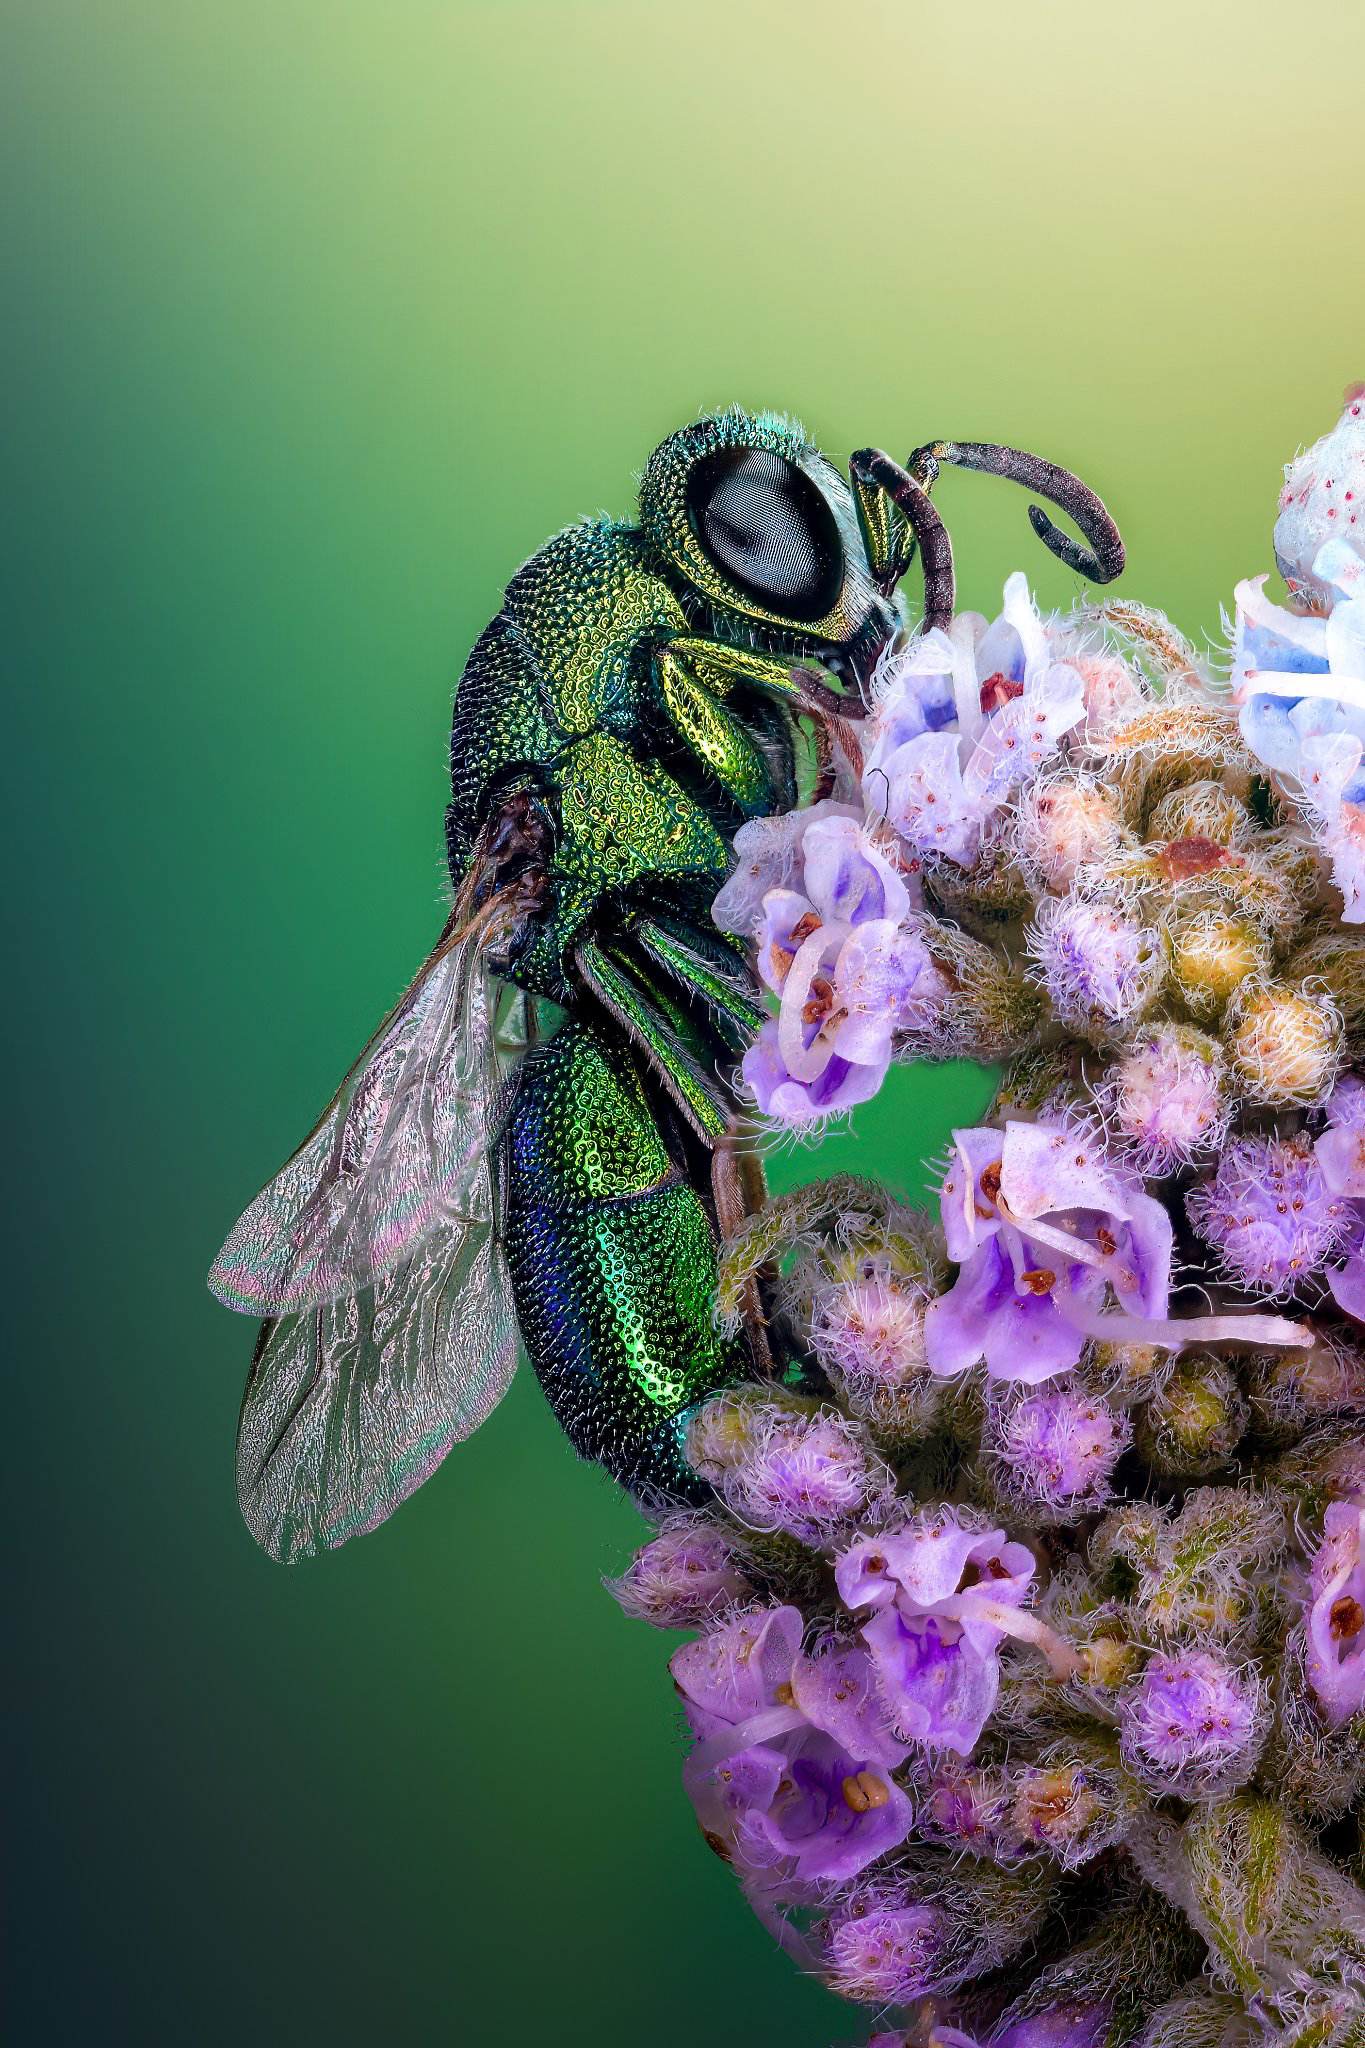 A green wasp standing on a purple flower